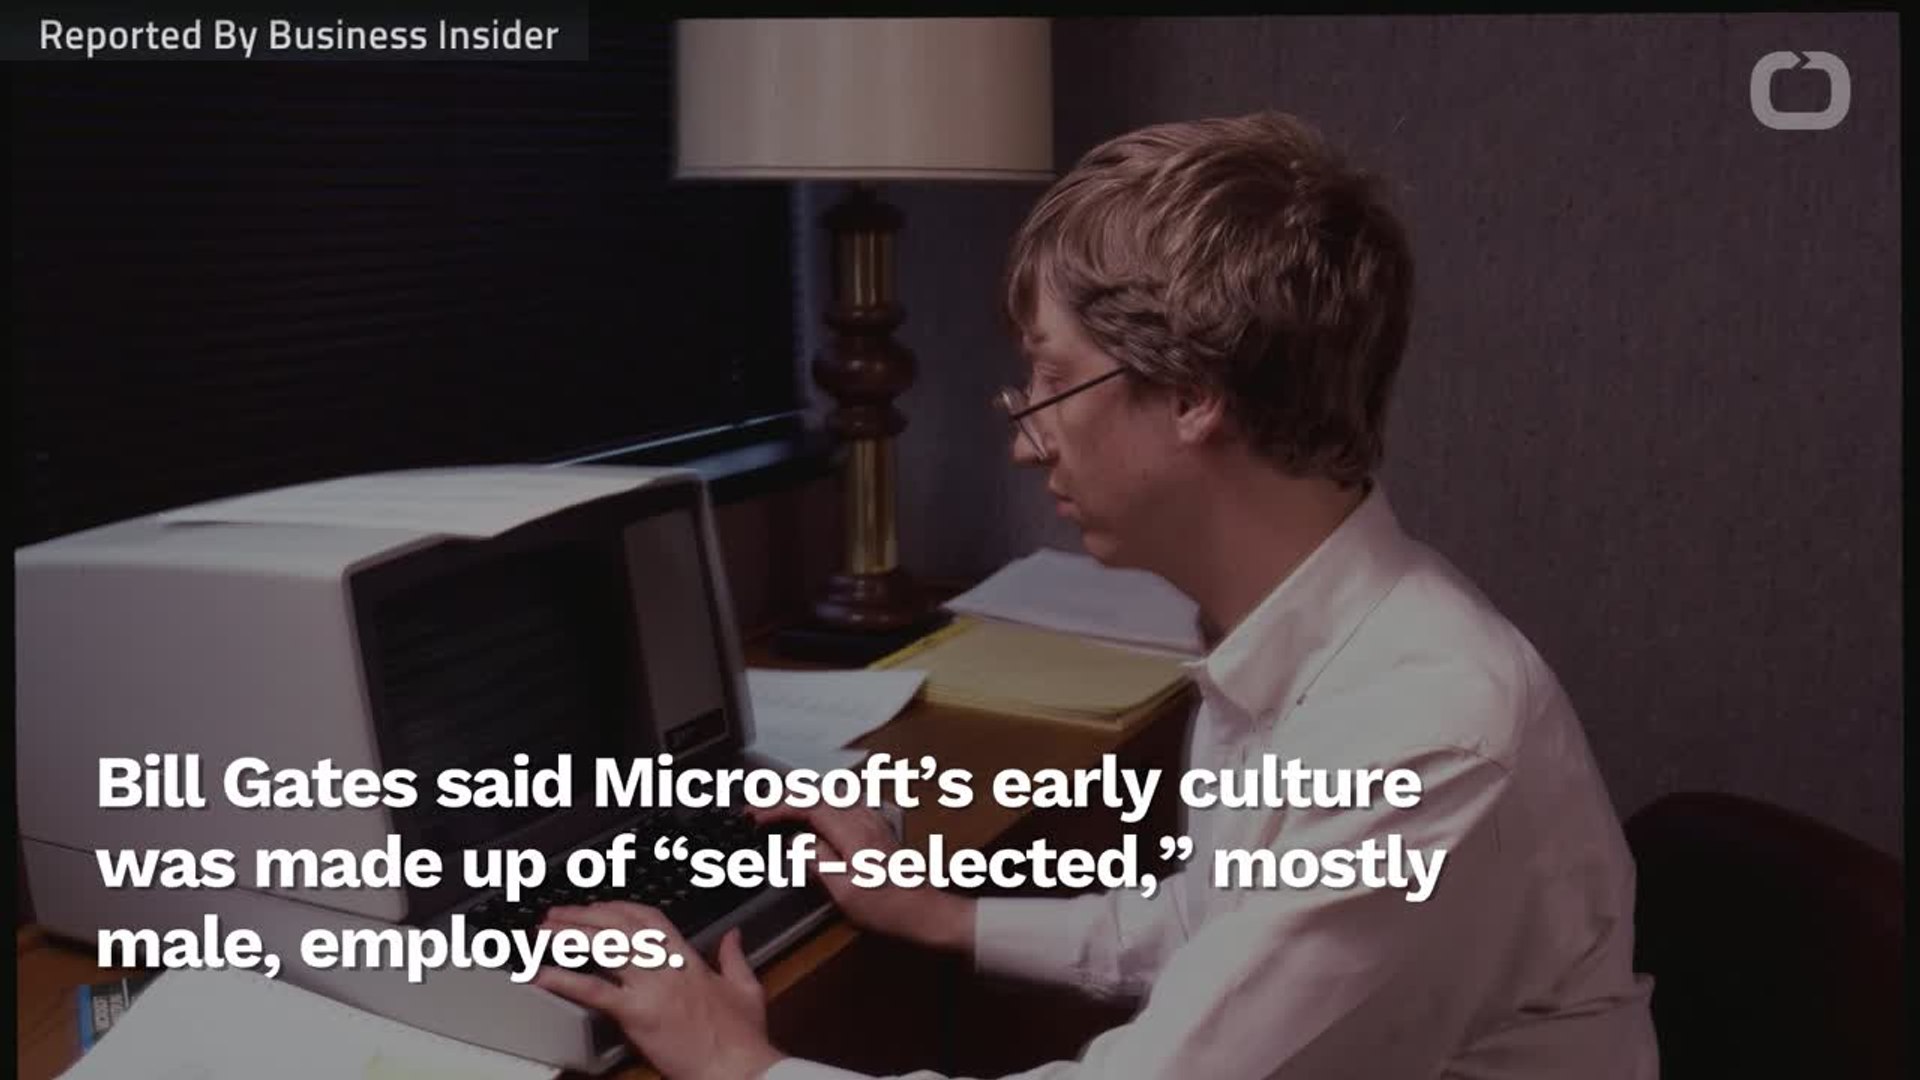 Bill Gates Talks About Microsoft's Early Culture